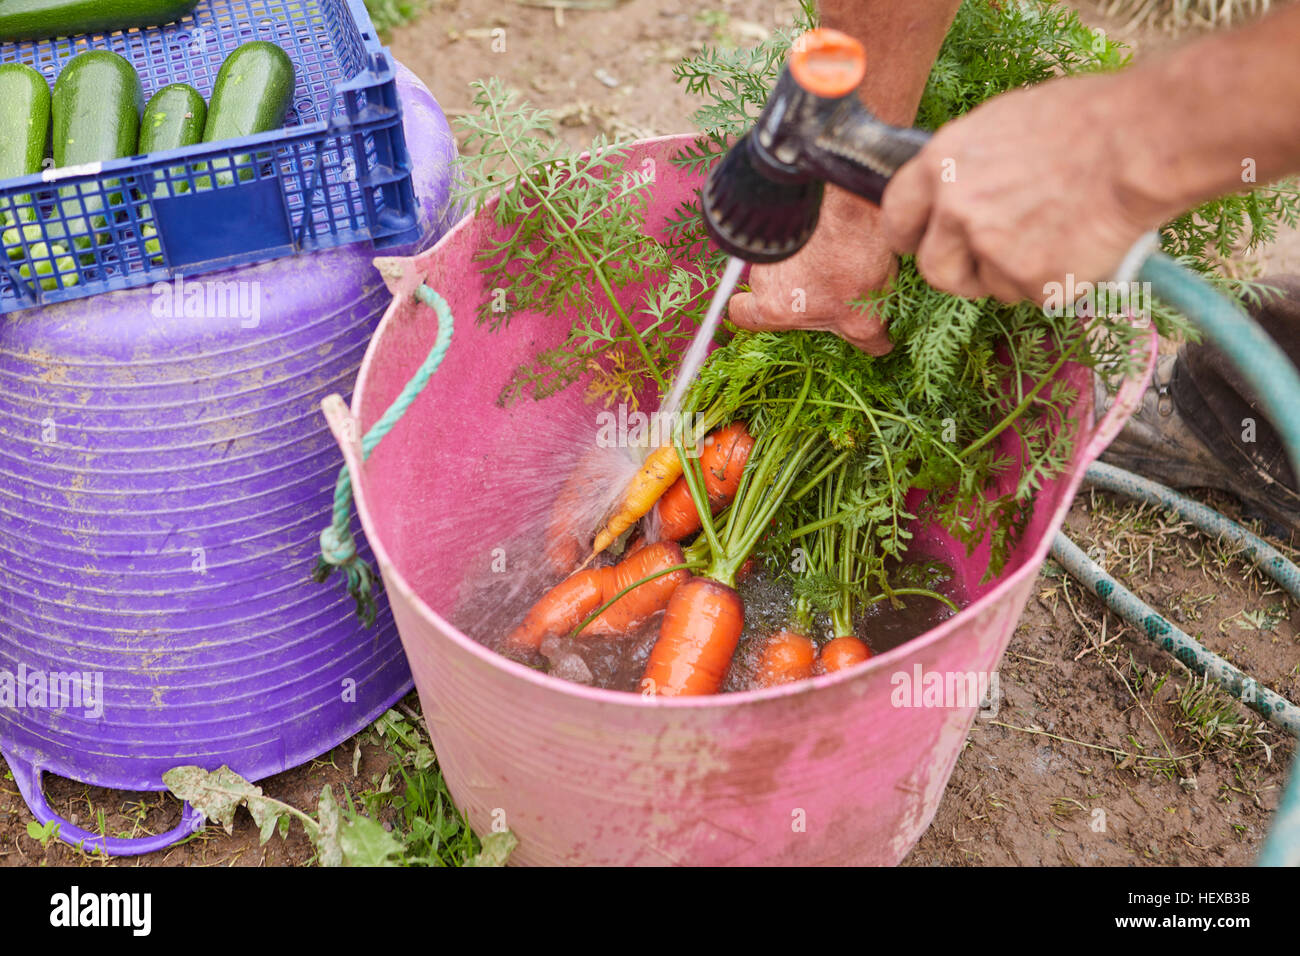 Cropped view of man rinsing freshly harvested carrots in trug Stock Photo